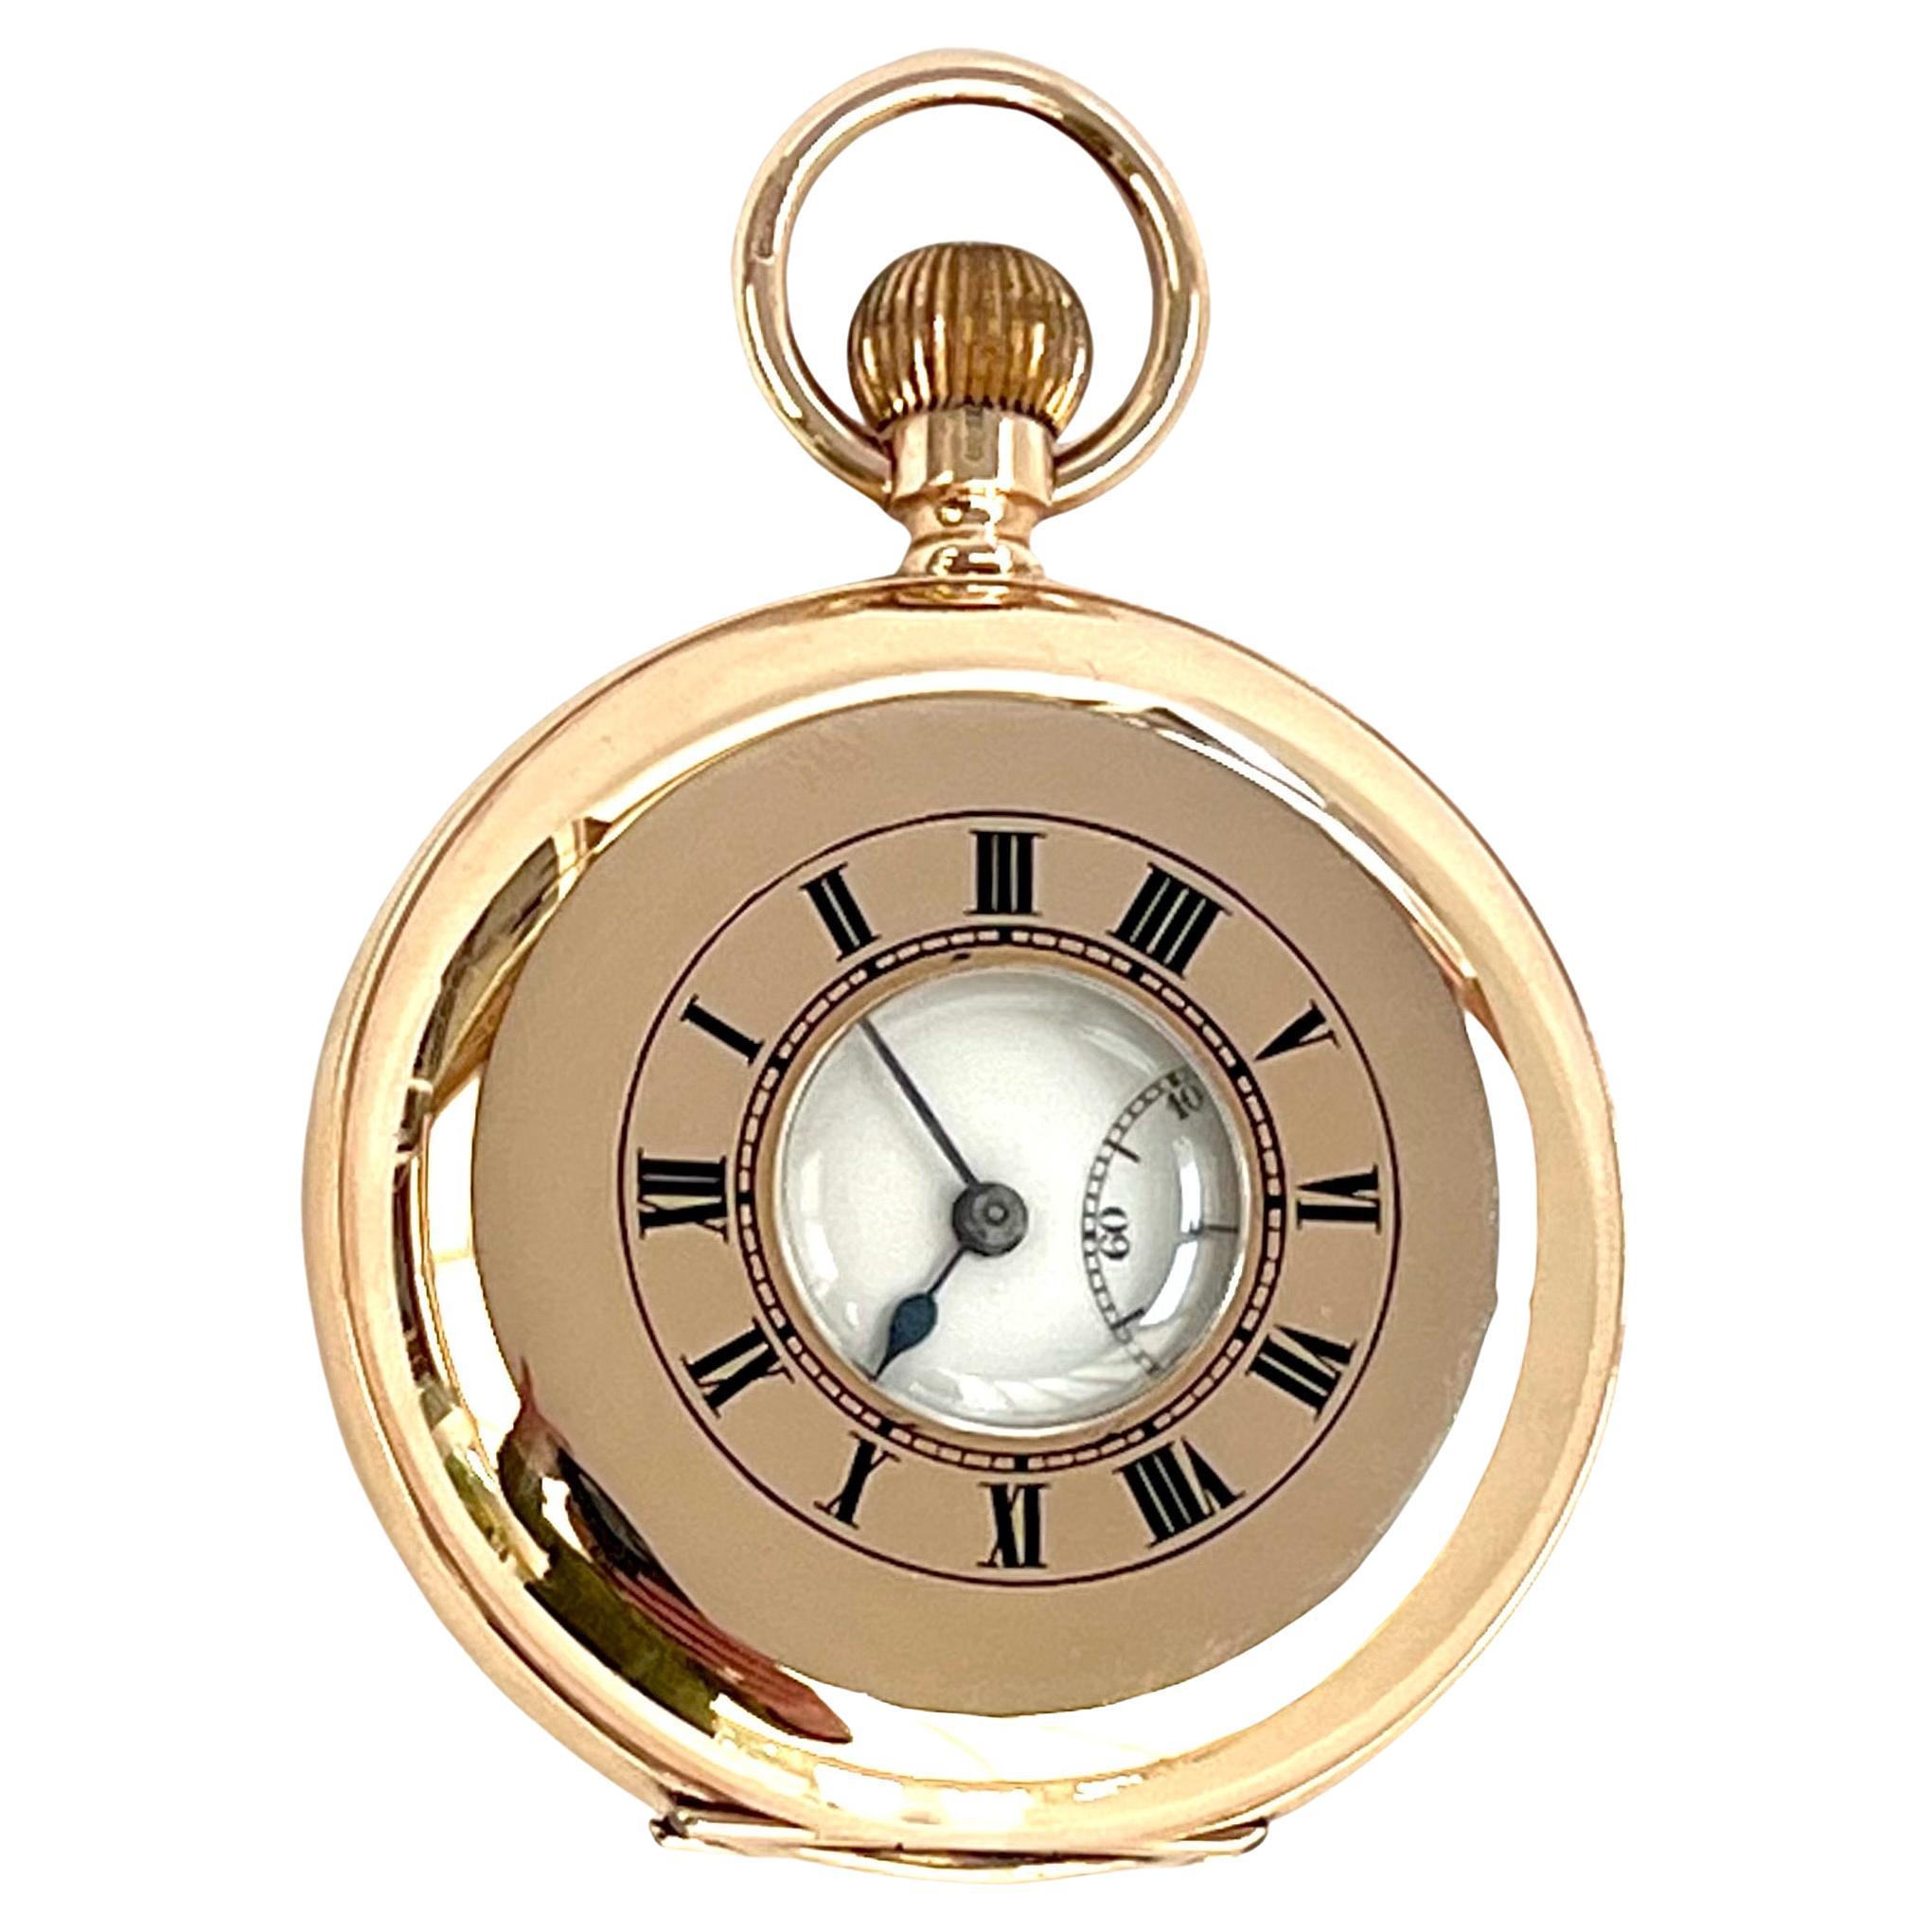 What is a hunter pocket watch?